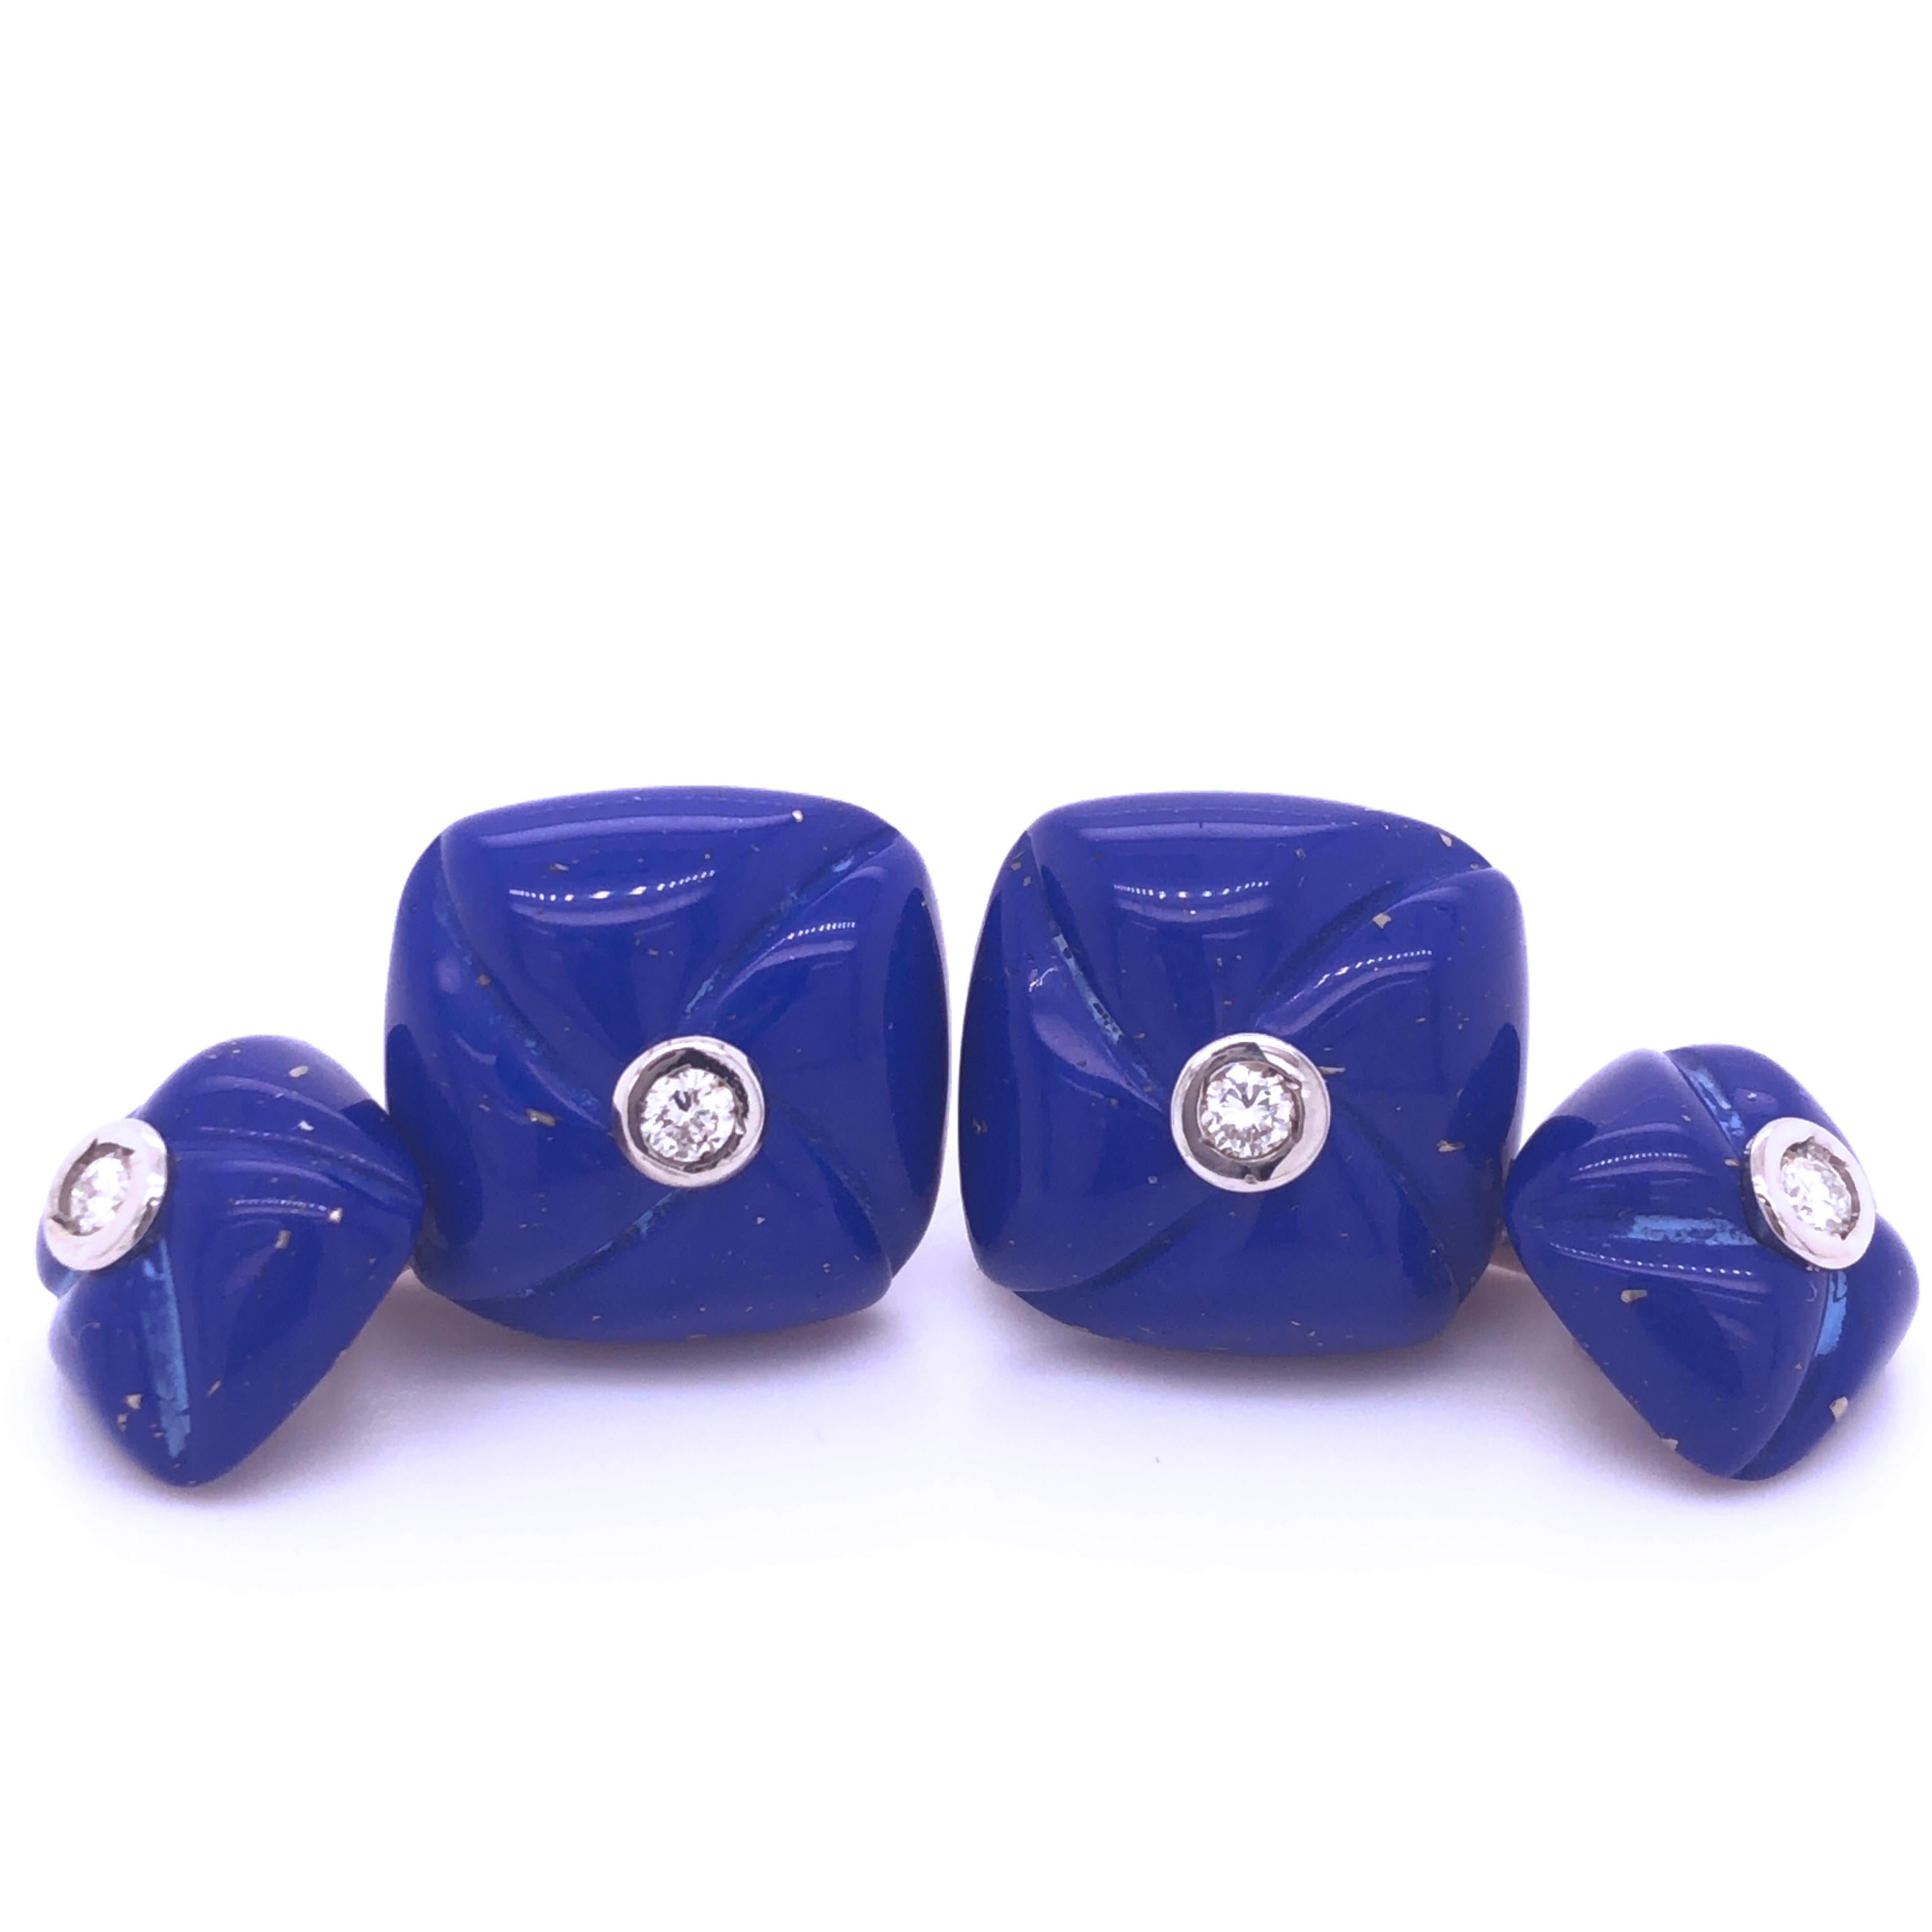 Absolutely Chic, Classy yet Timeless Squared Shaped Hand Inlaid Hand Carved Natural Persian Blue Lapis Lazuli Cufflinks featuring four 0.20 Carat Brilliant Cut Top Quality White Diamond in a White Gold Setting.
In our smart fitted Leather Case and